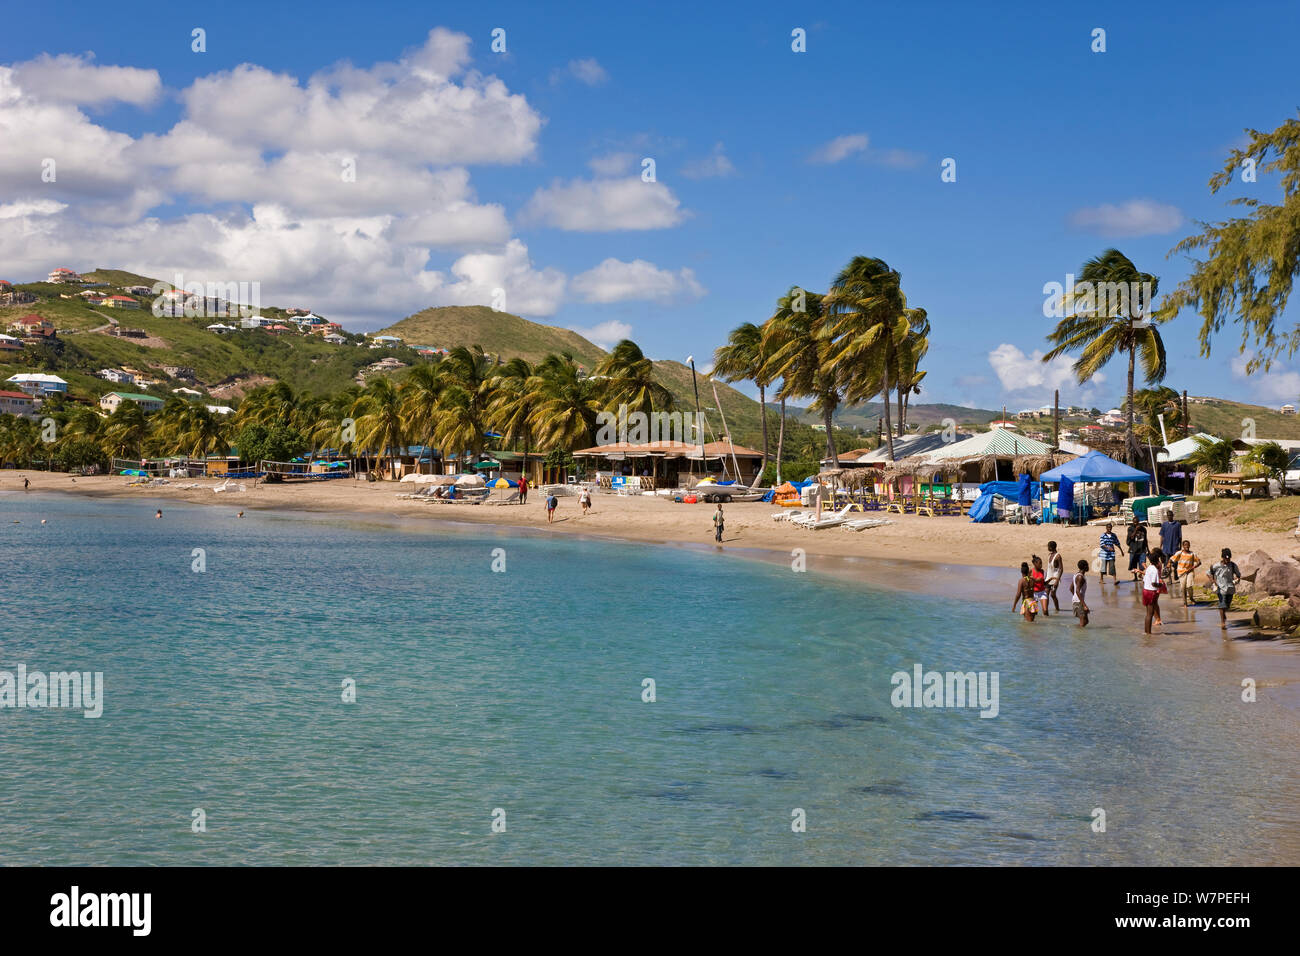 Frigate Bay Beach, St Kitts, St Kitts and Nevis, Leeward Islands, Lesser Antilles, Caribbean, West Indies 2008 Stock Photo